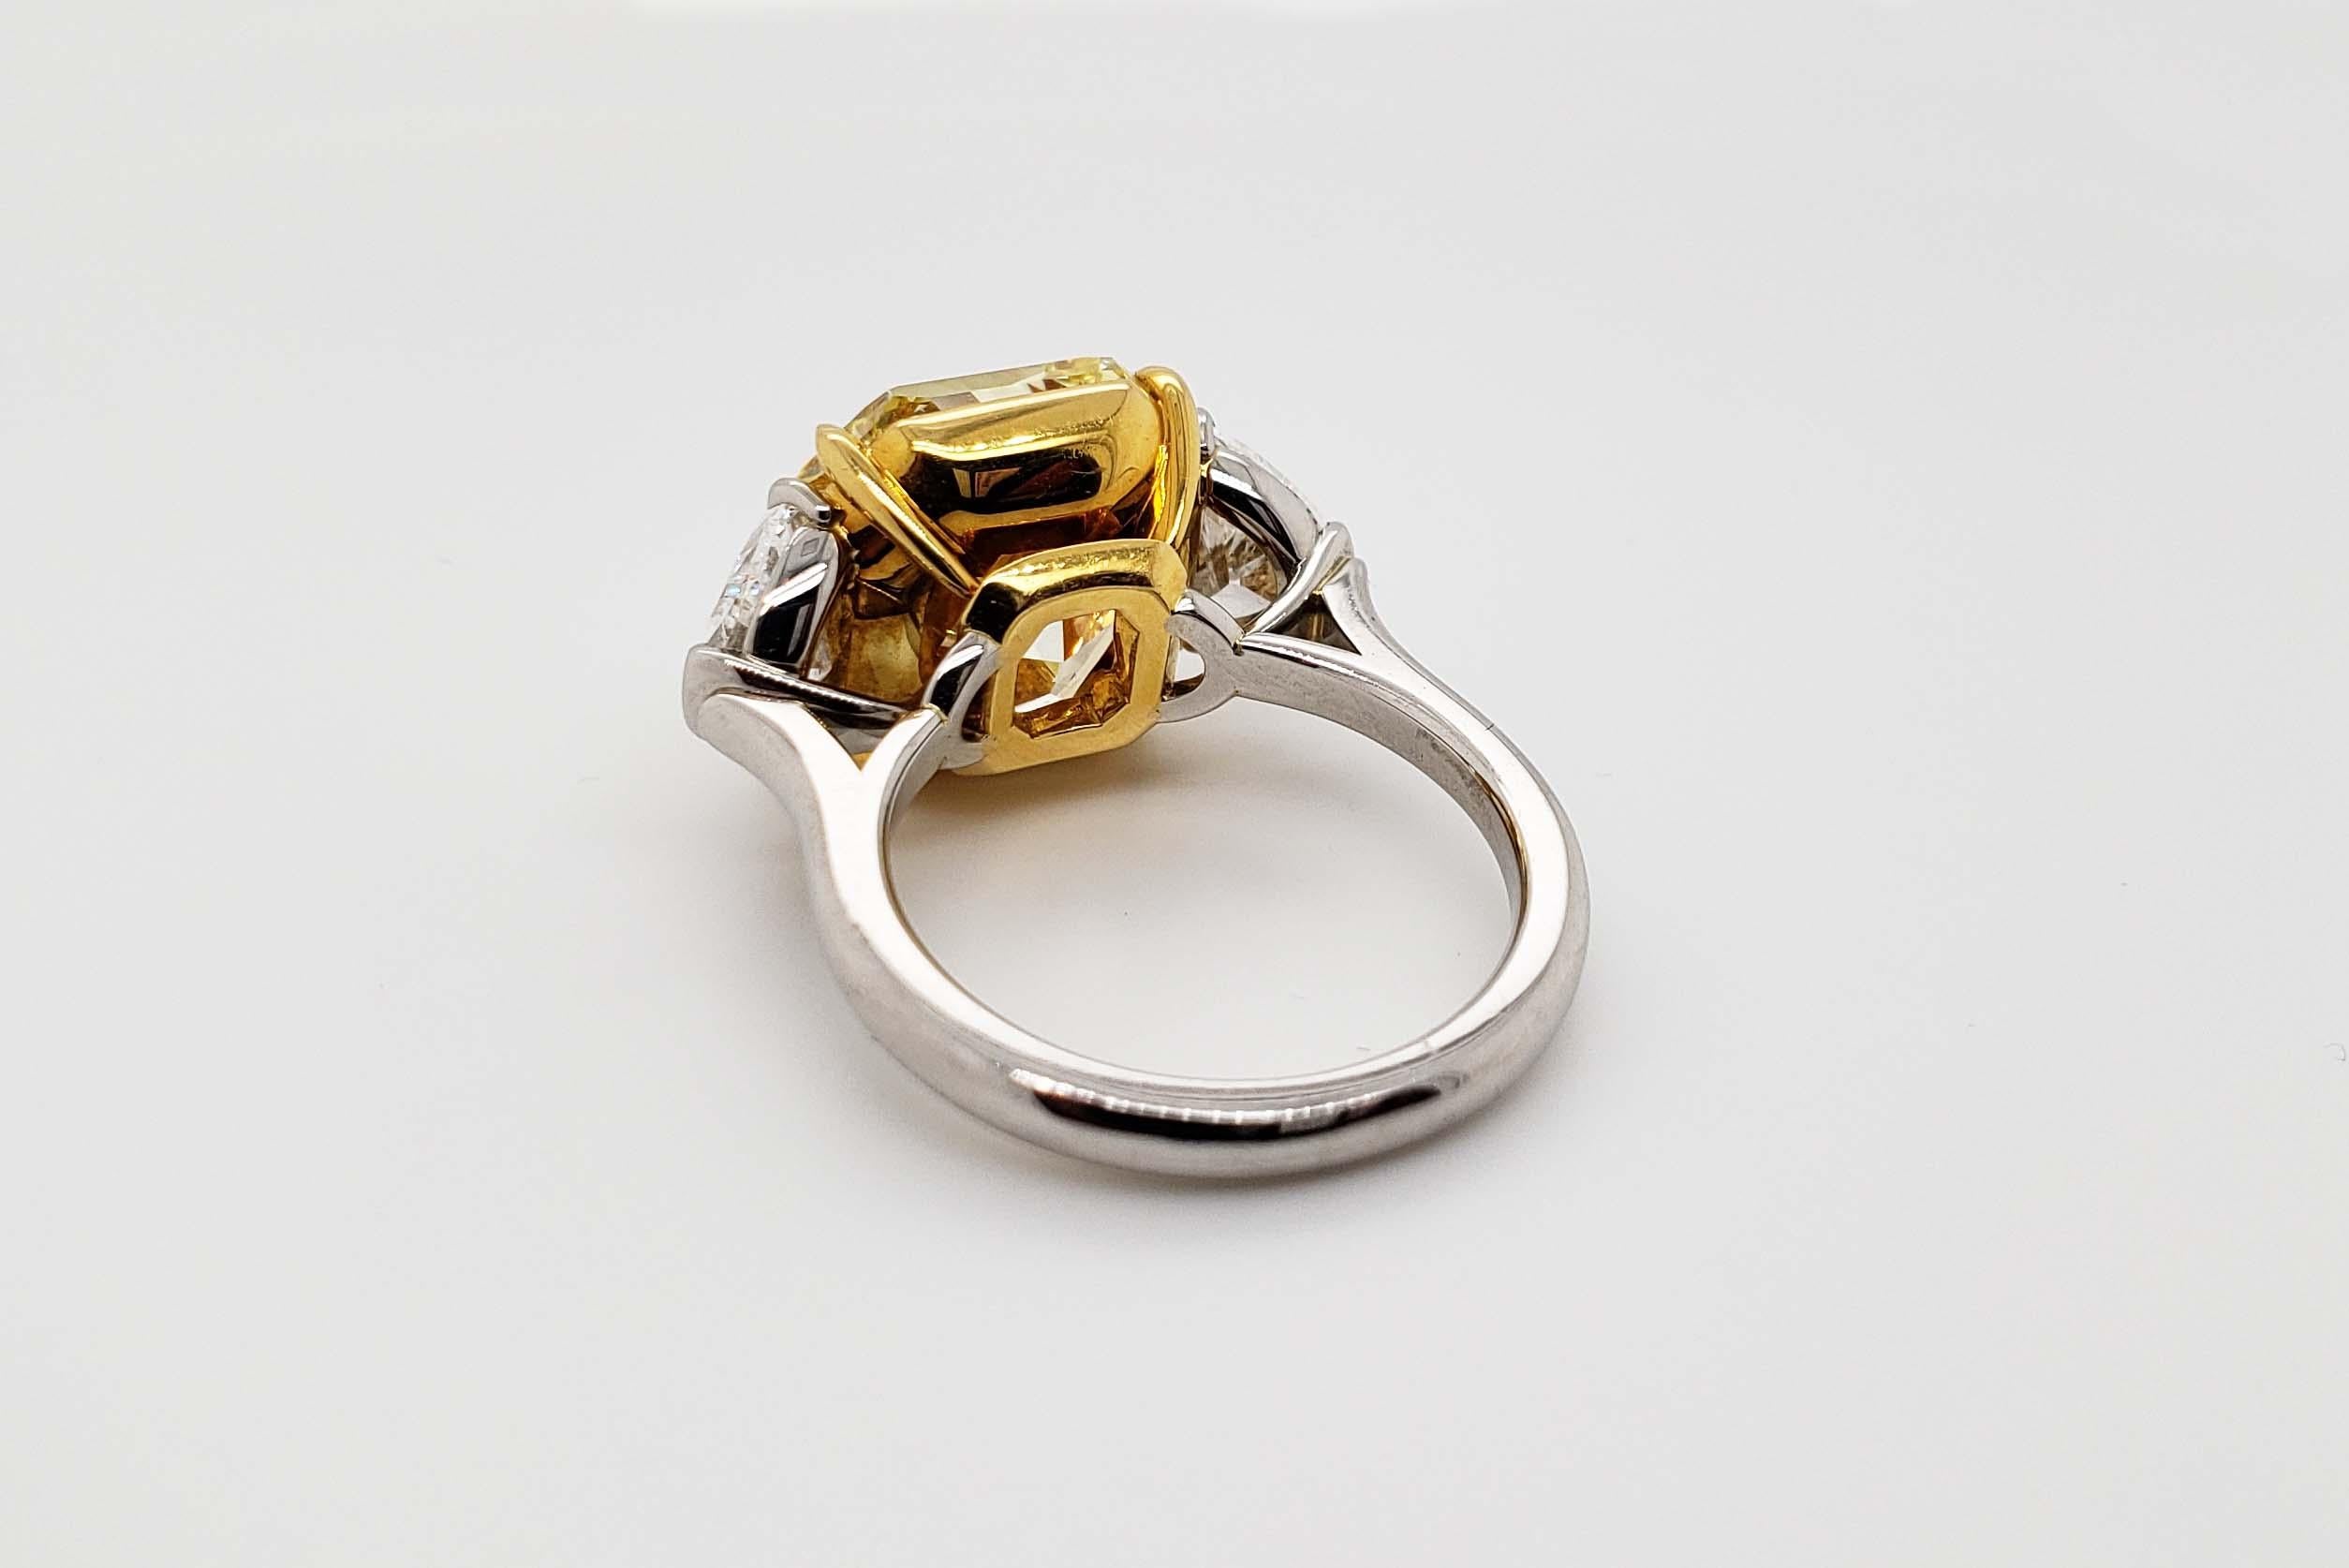 Contemporary Scarselli 10 Carat Fancy Intense Yellow Internally Flawless Radiant Diamond Ring For Sale